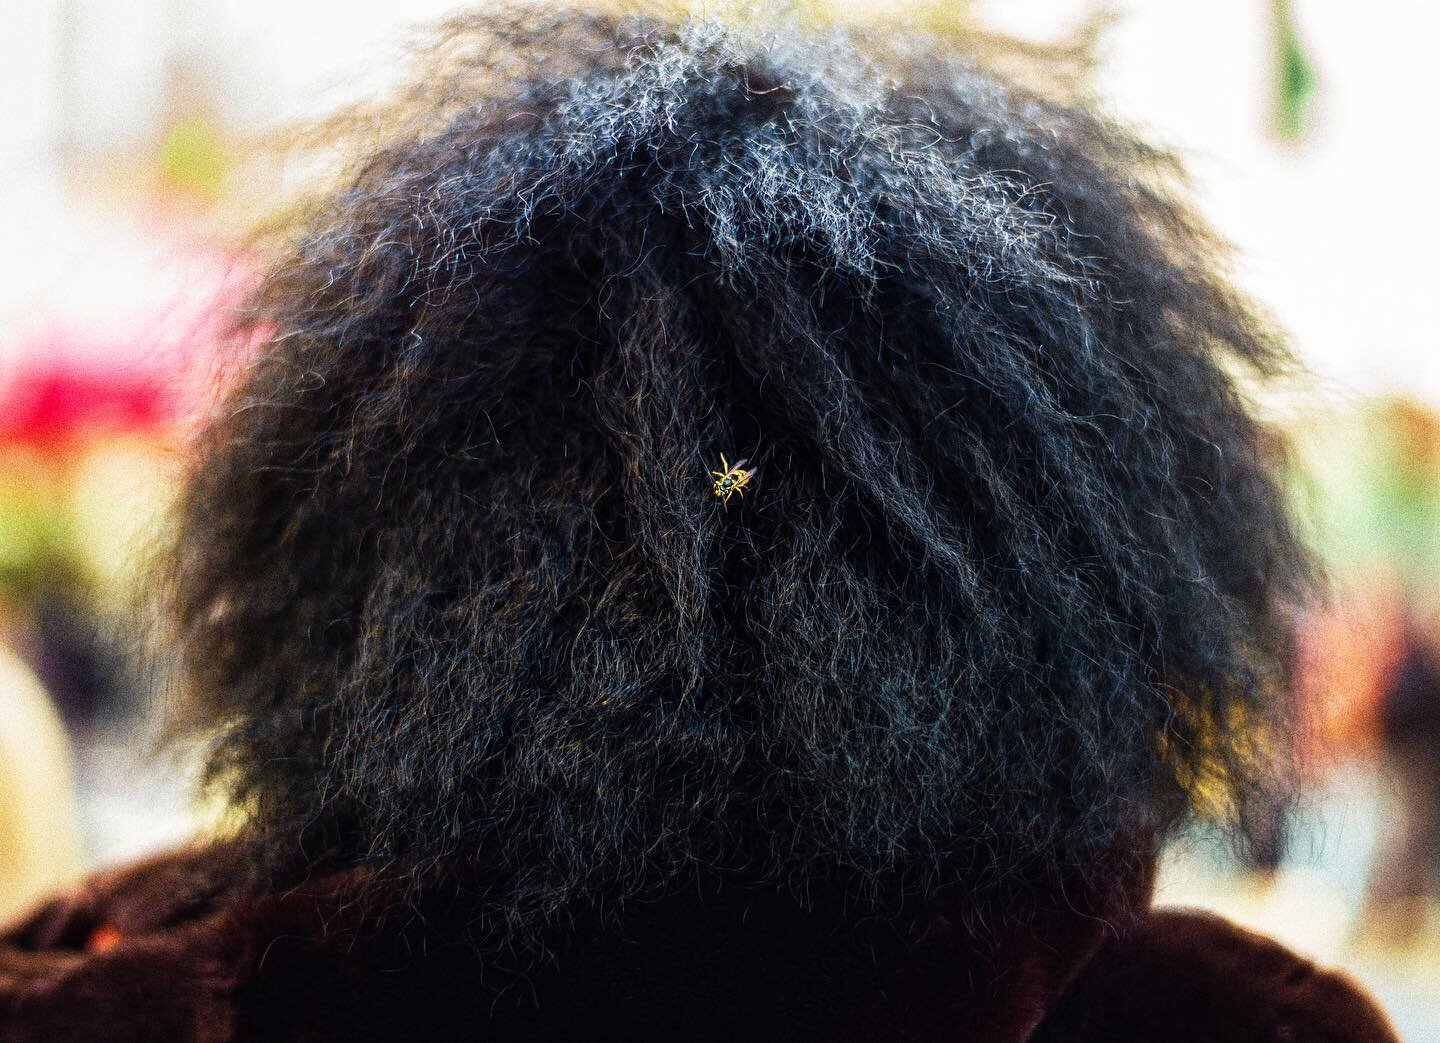 #wasp #hair #spaceistheplace #streetphotography #leicam9 #50mm